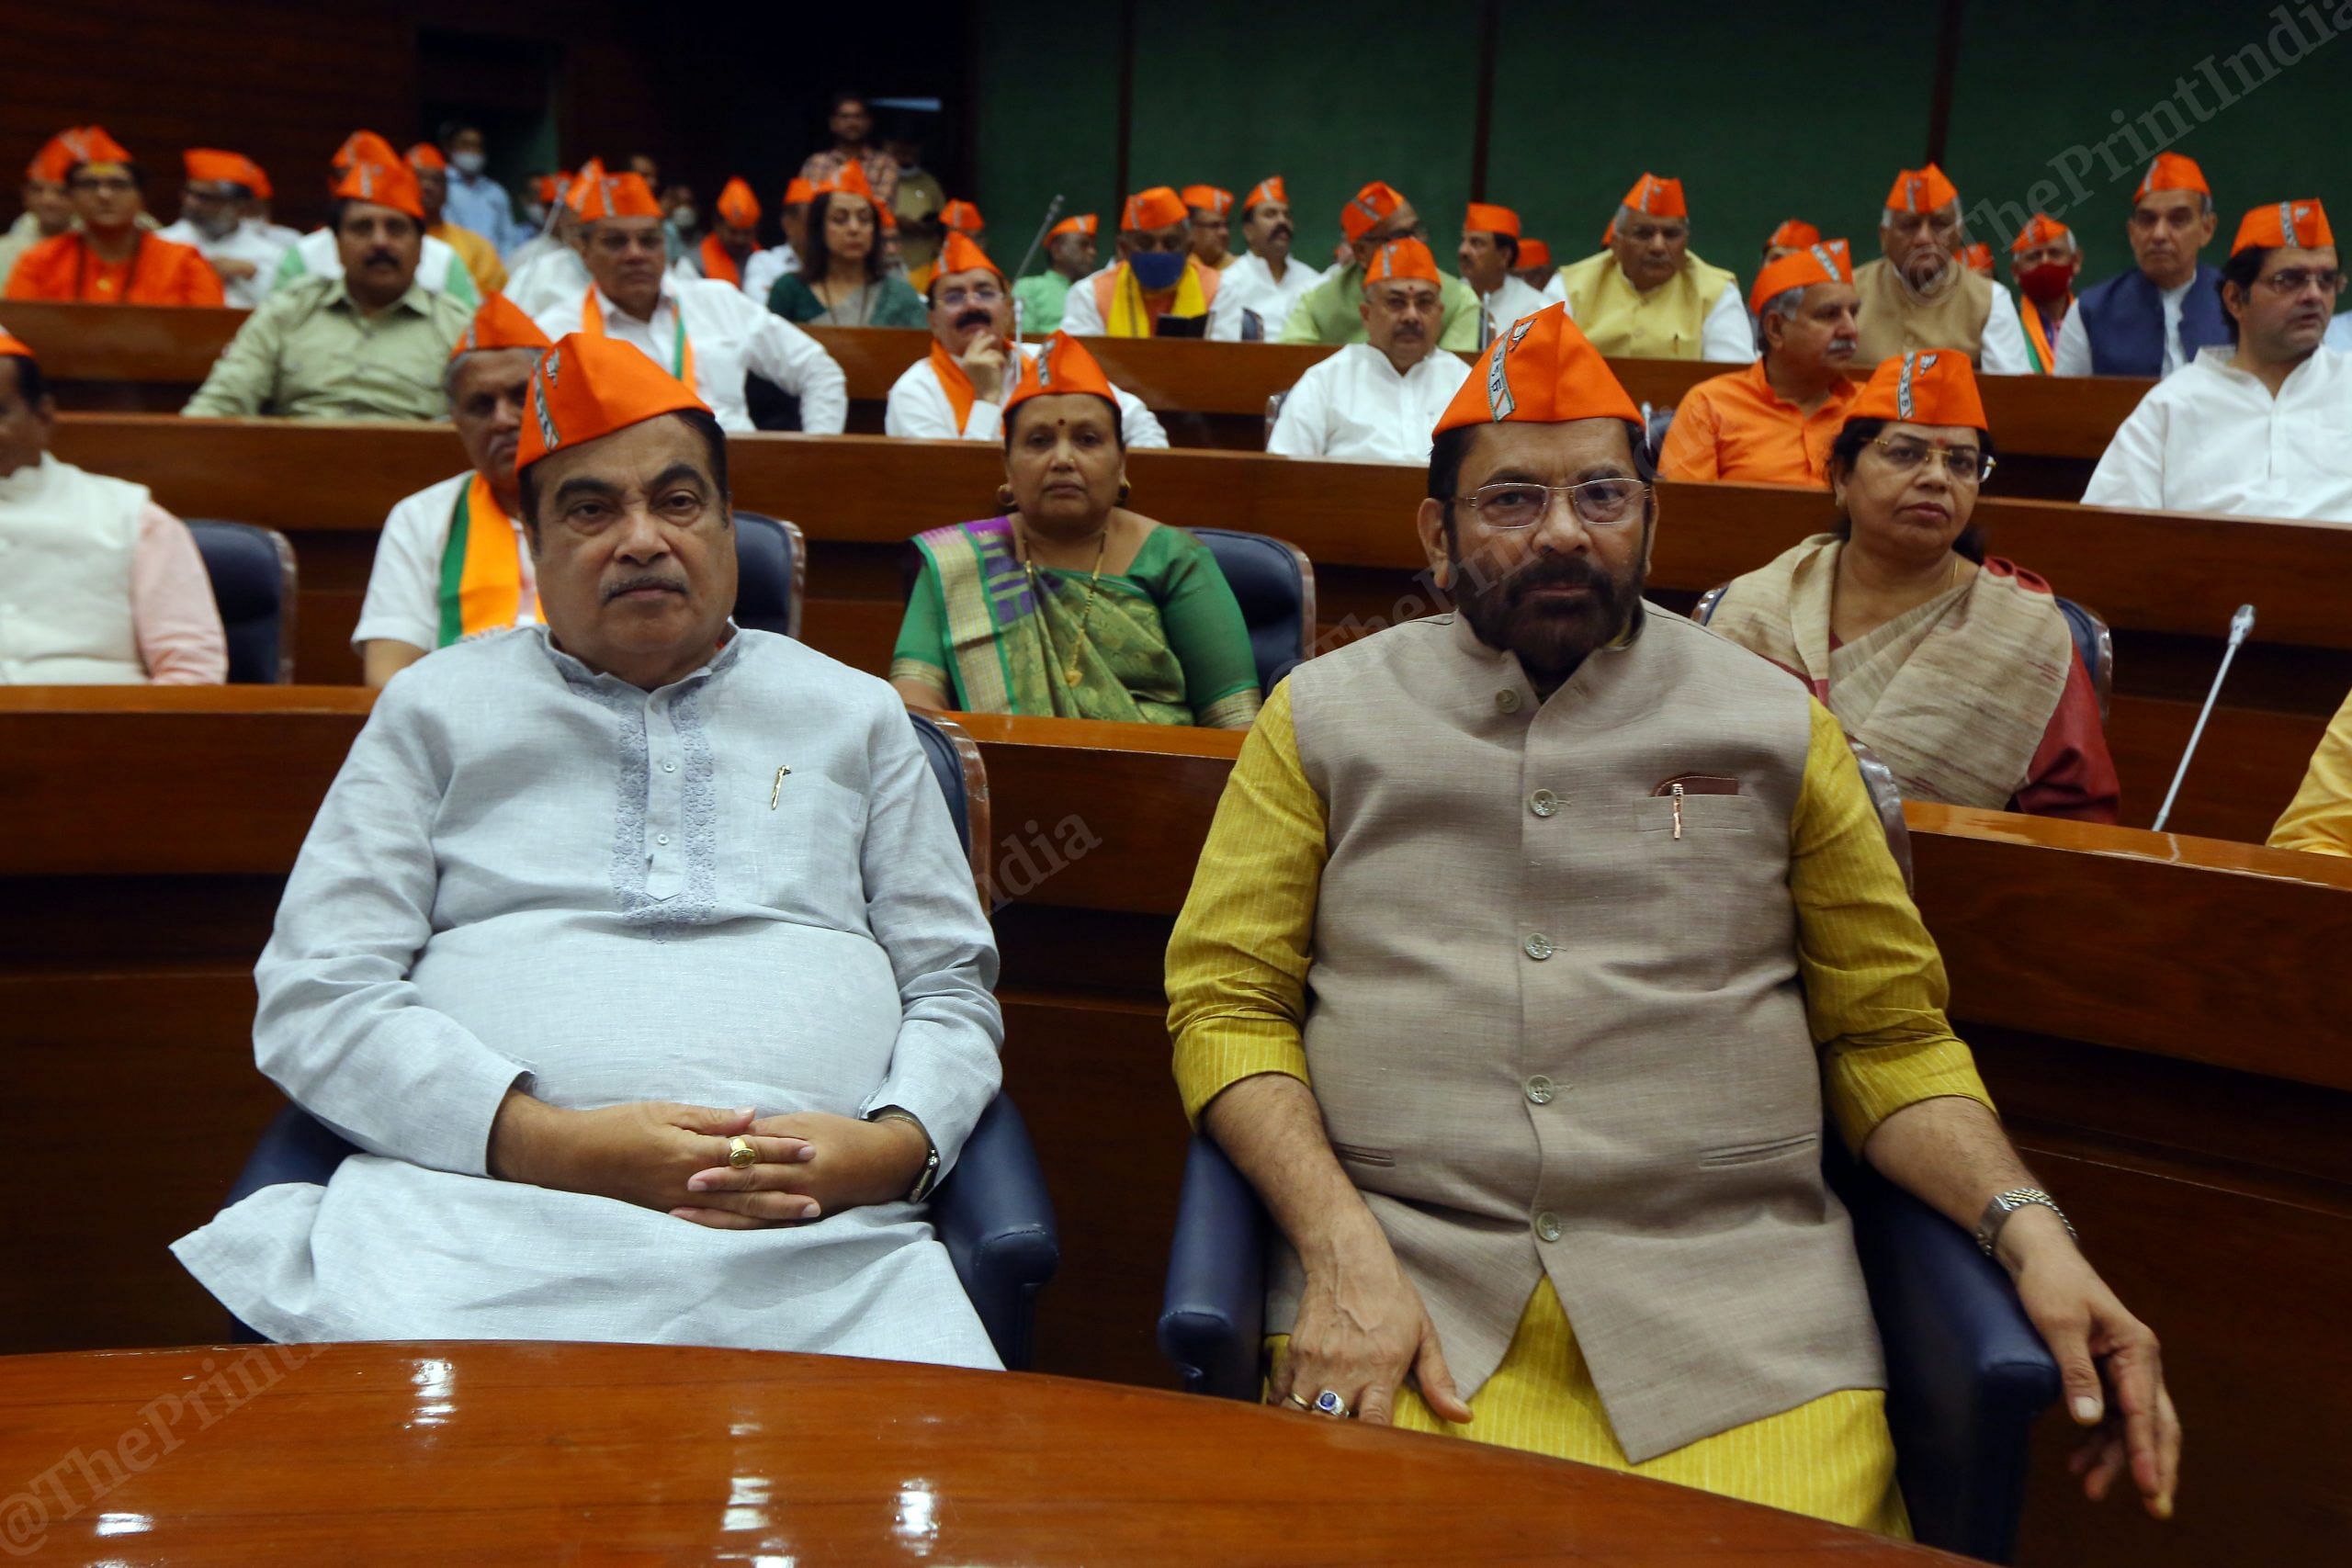 Cabinet Ministers Nitin Gadkari and Mukhtar Abbas Naqvi at the BJP's 42nd Foundation Day event at Parliament Annexe | Photo: Praveen Jain | ThePrint